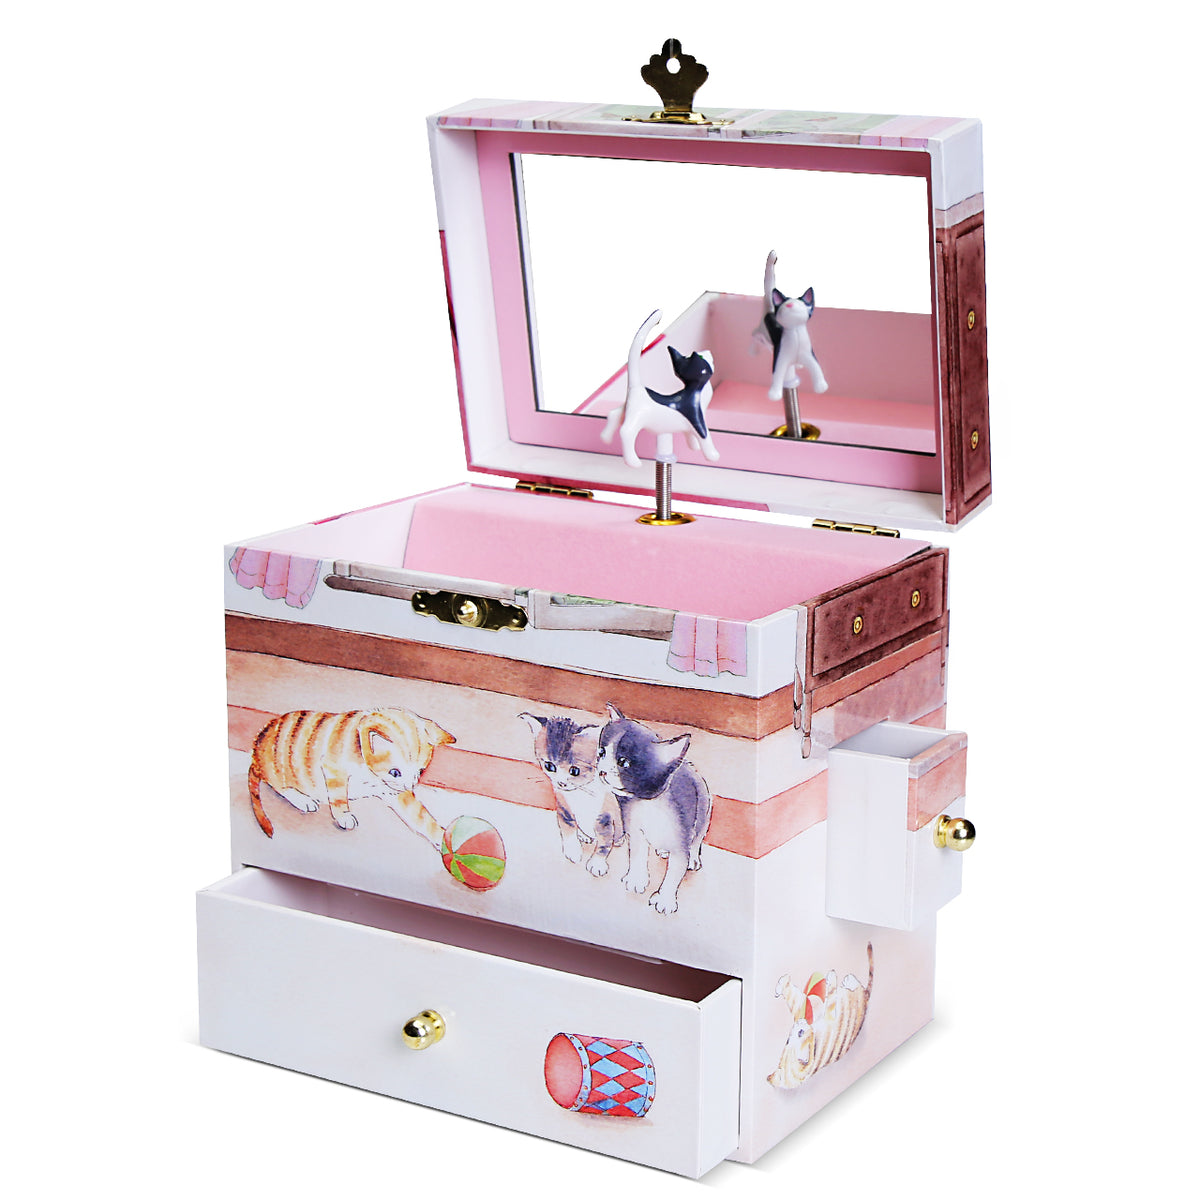 Curious Kittens Musical Jewelry Box - Ode to Joy Tune